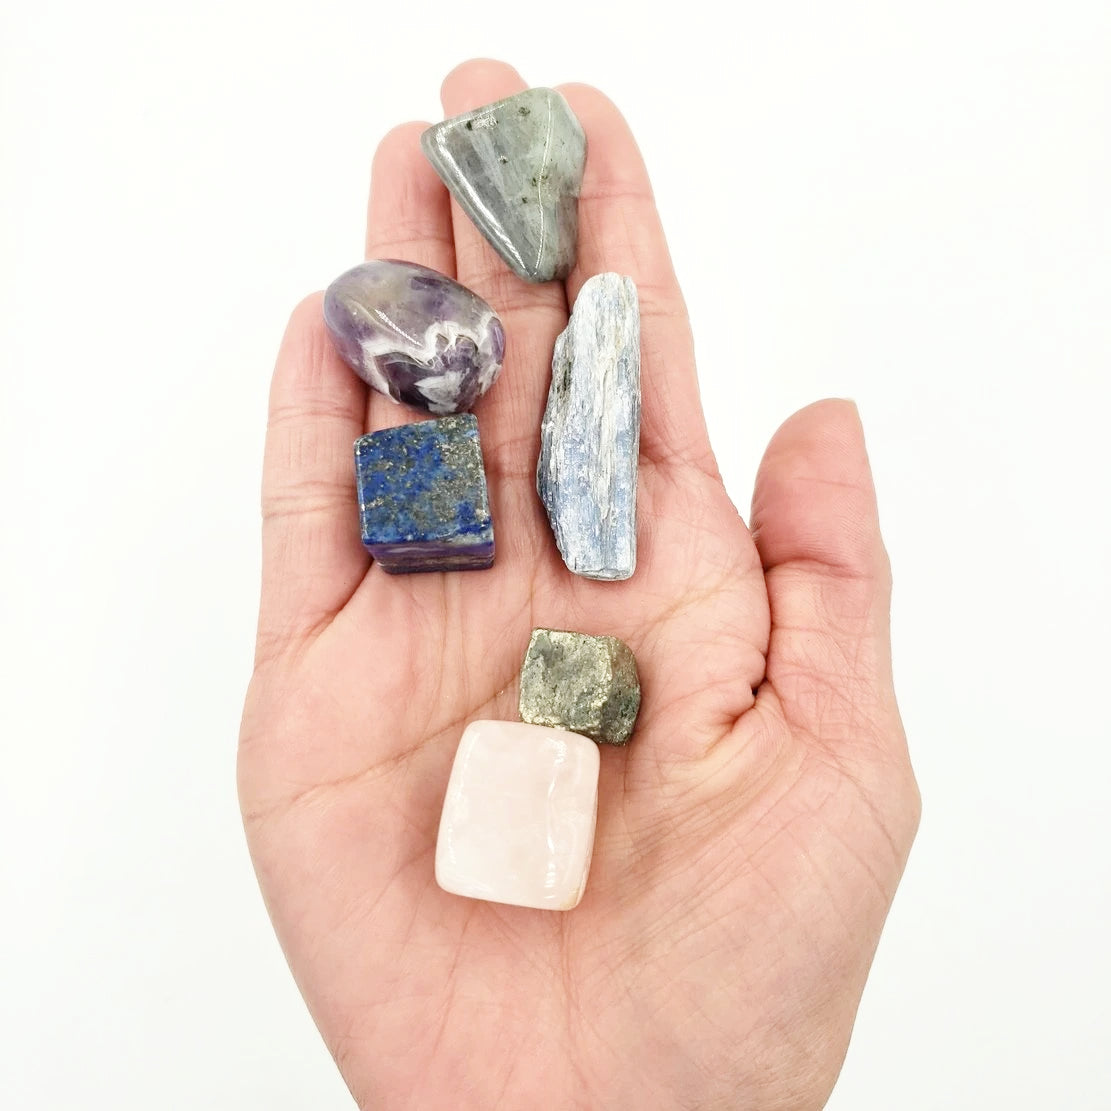 Coffee Doesn't Work, Let's Try Crystals - New Parent Stone Set - Elevated Metaphysical